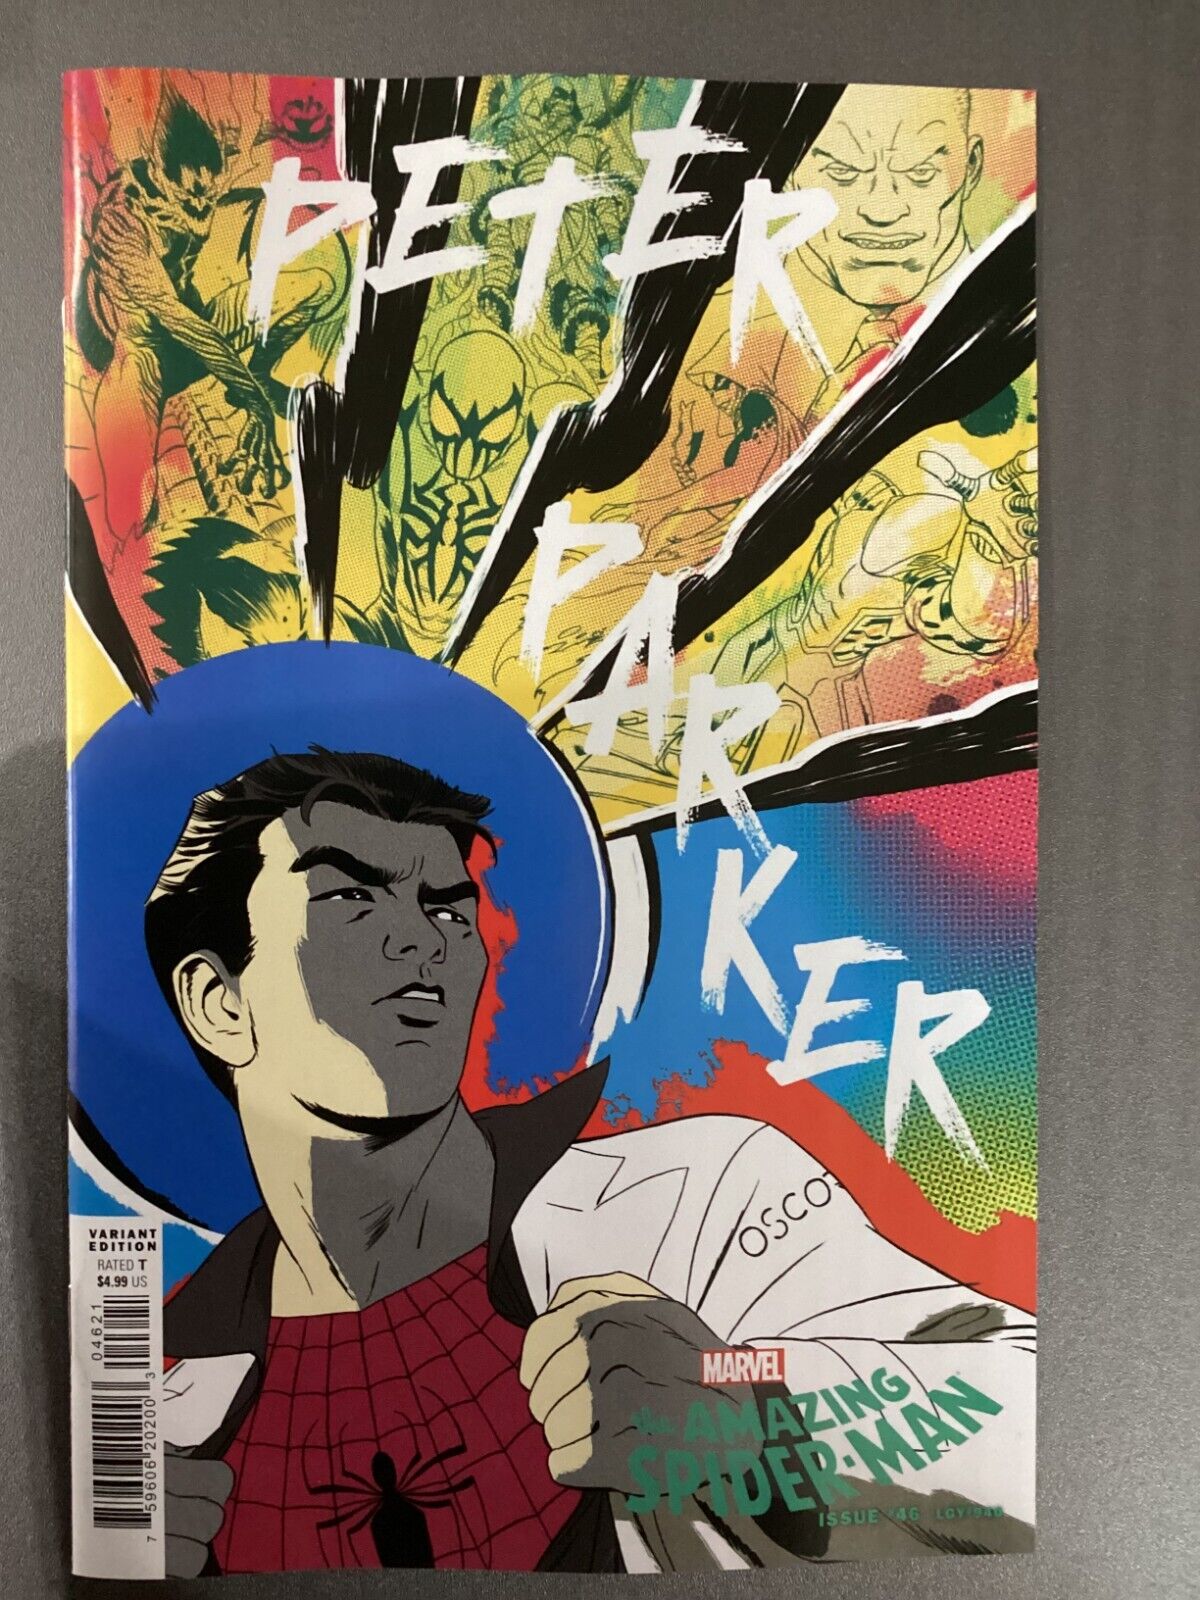 The Amazing Spider-Man #46 Marcos Martin Peter Parkerverse Variant